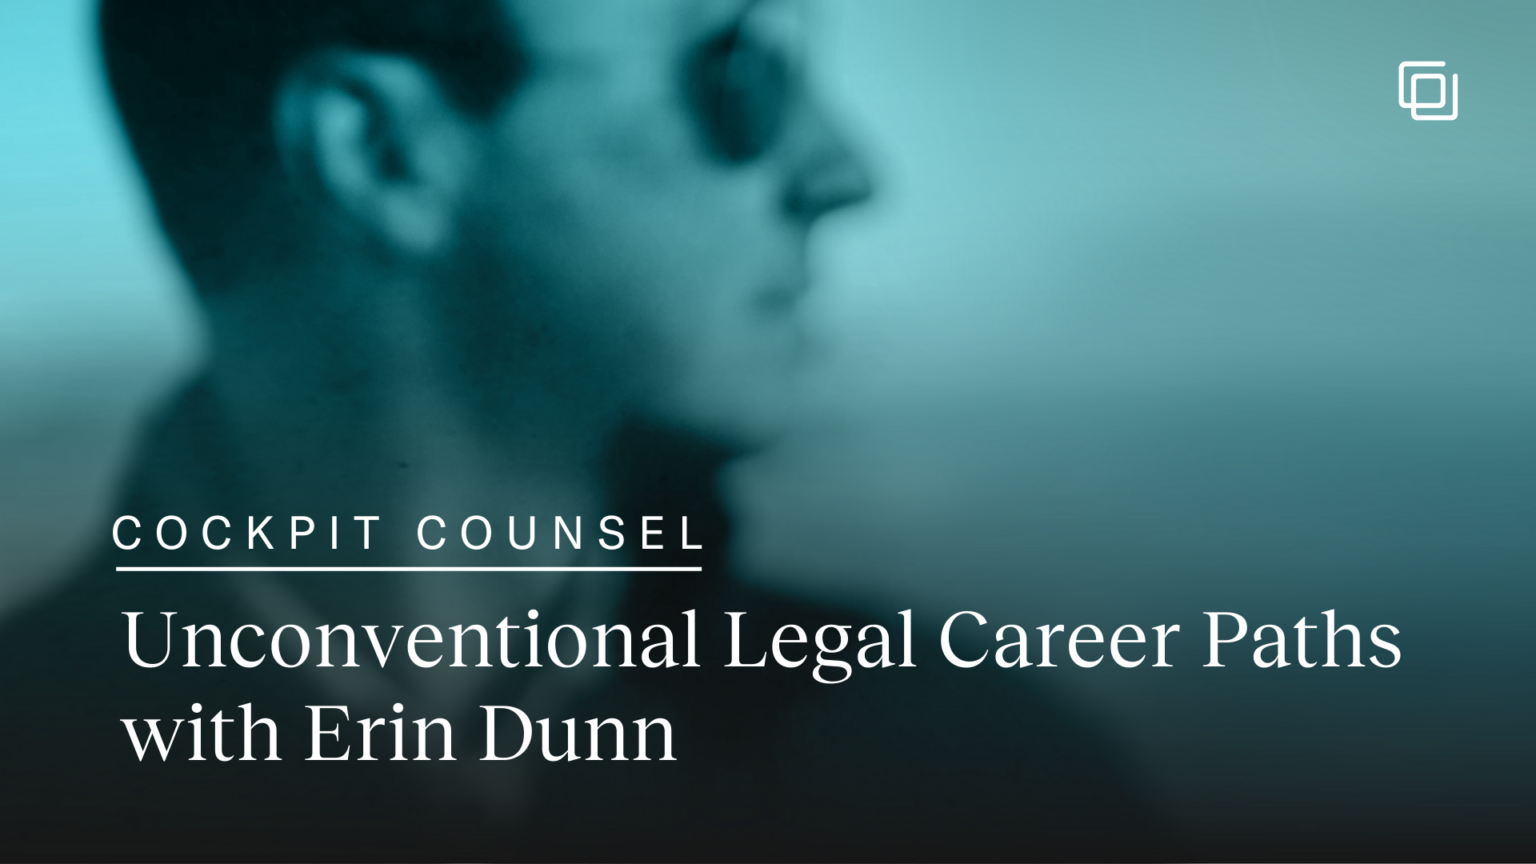 Cockpit Counsel: Unconventional Legal Career Paths with Erin Dunn